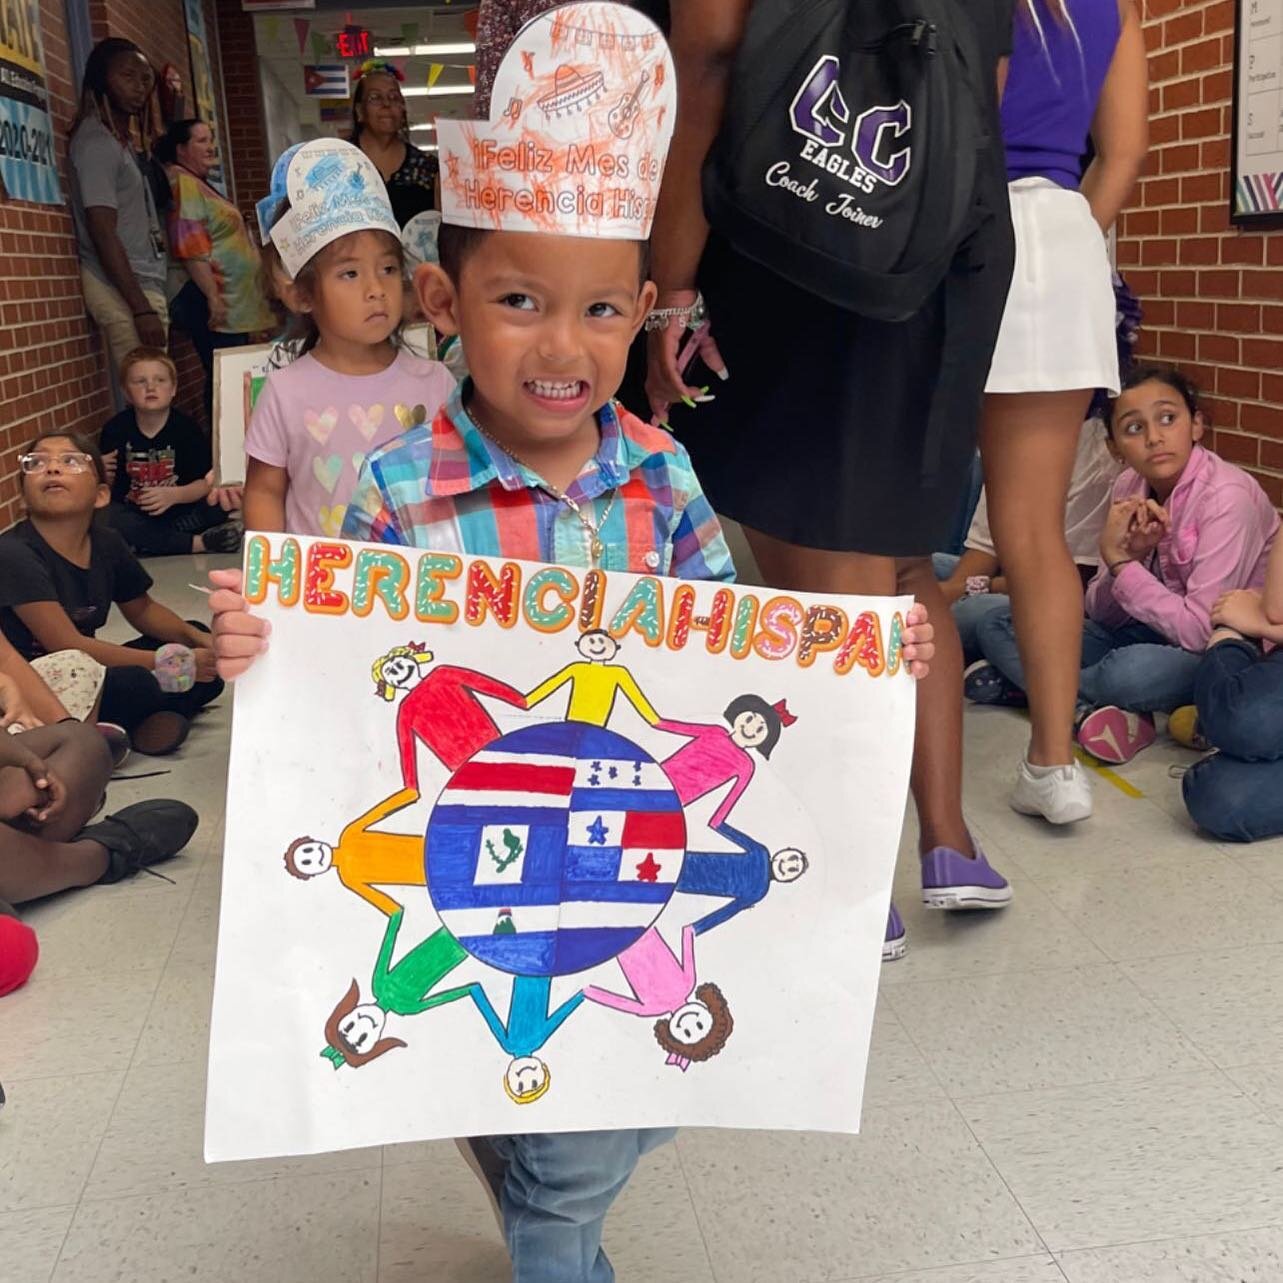 Alta Vista Elementary celebrates Hispanic Heritage Month with a special parade with students, staff and families. Students were encouraged to dress in clothing from a Central/South American country, as a famous person, or create a poster about a Cent